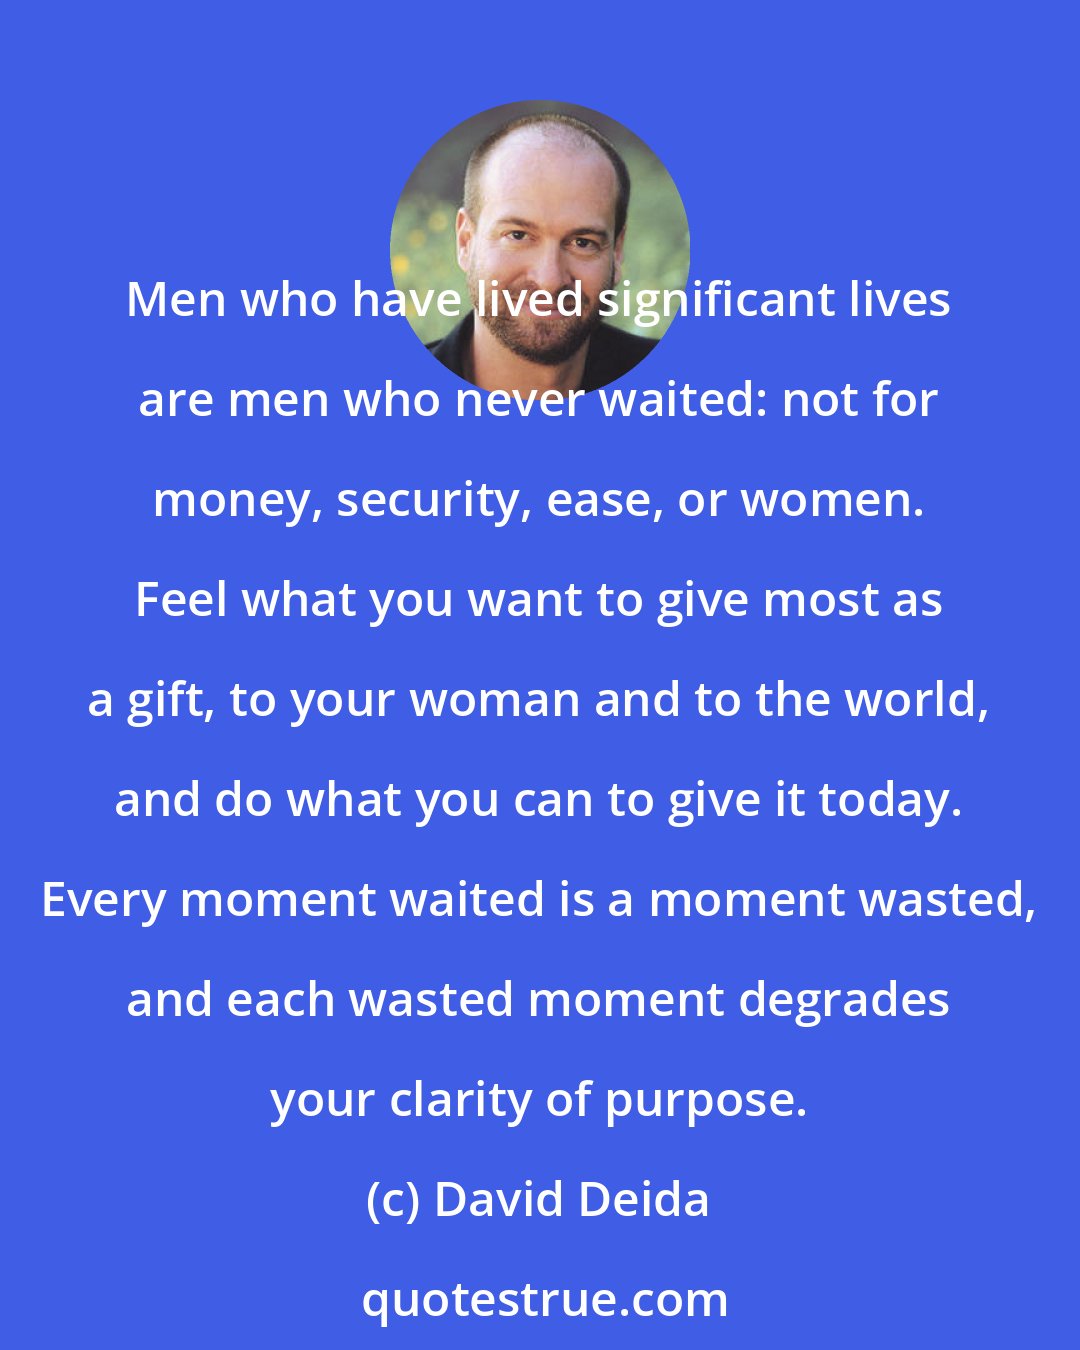 David Deida: Men who have lived significant lives are men who never waited: not for money, security, ease, or women. Feel what you want to give most as a gift, to your woman and to the world, and do what you can to give it today. Every moment waited is a moment wasted, and each wasted moment degrades your clarity of purpose.